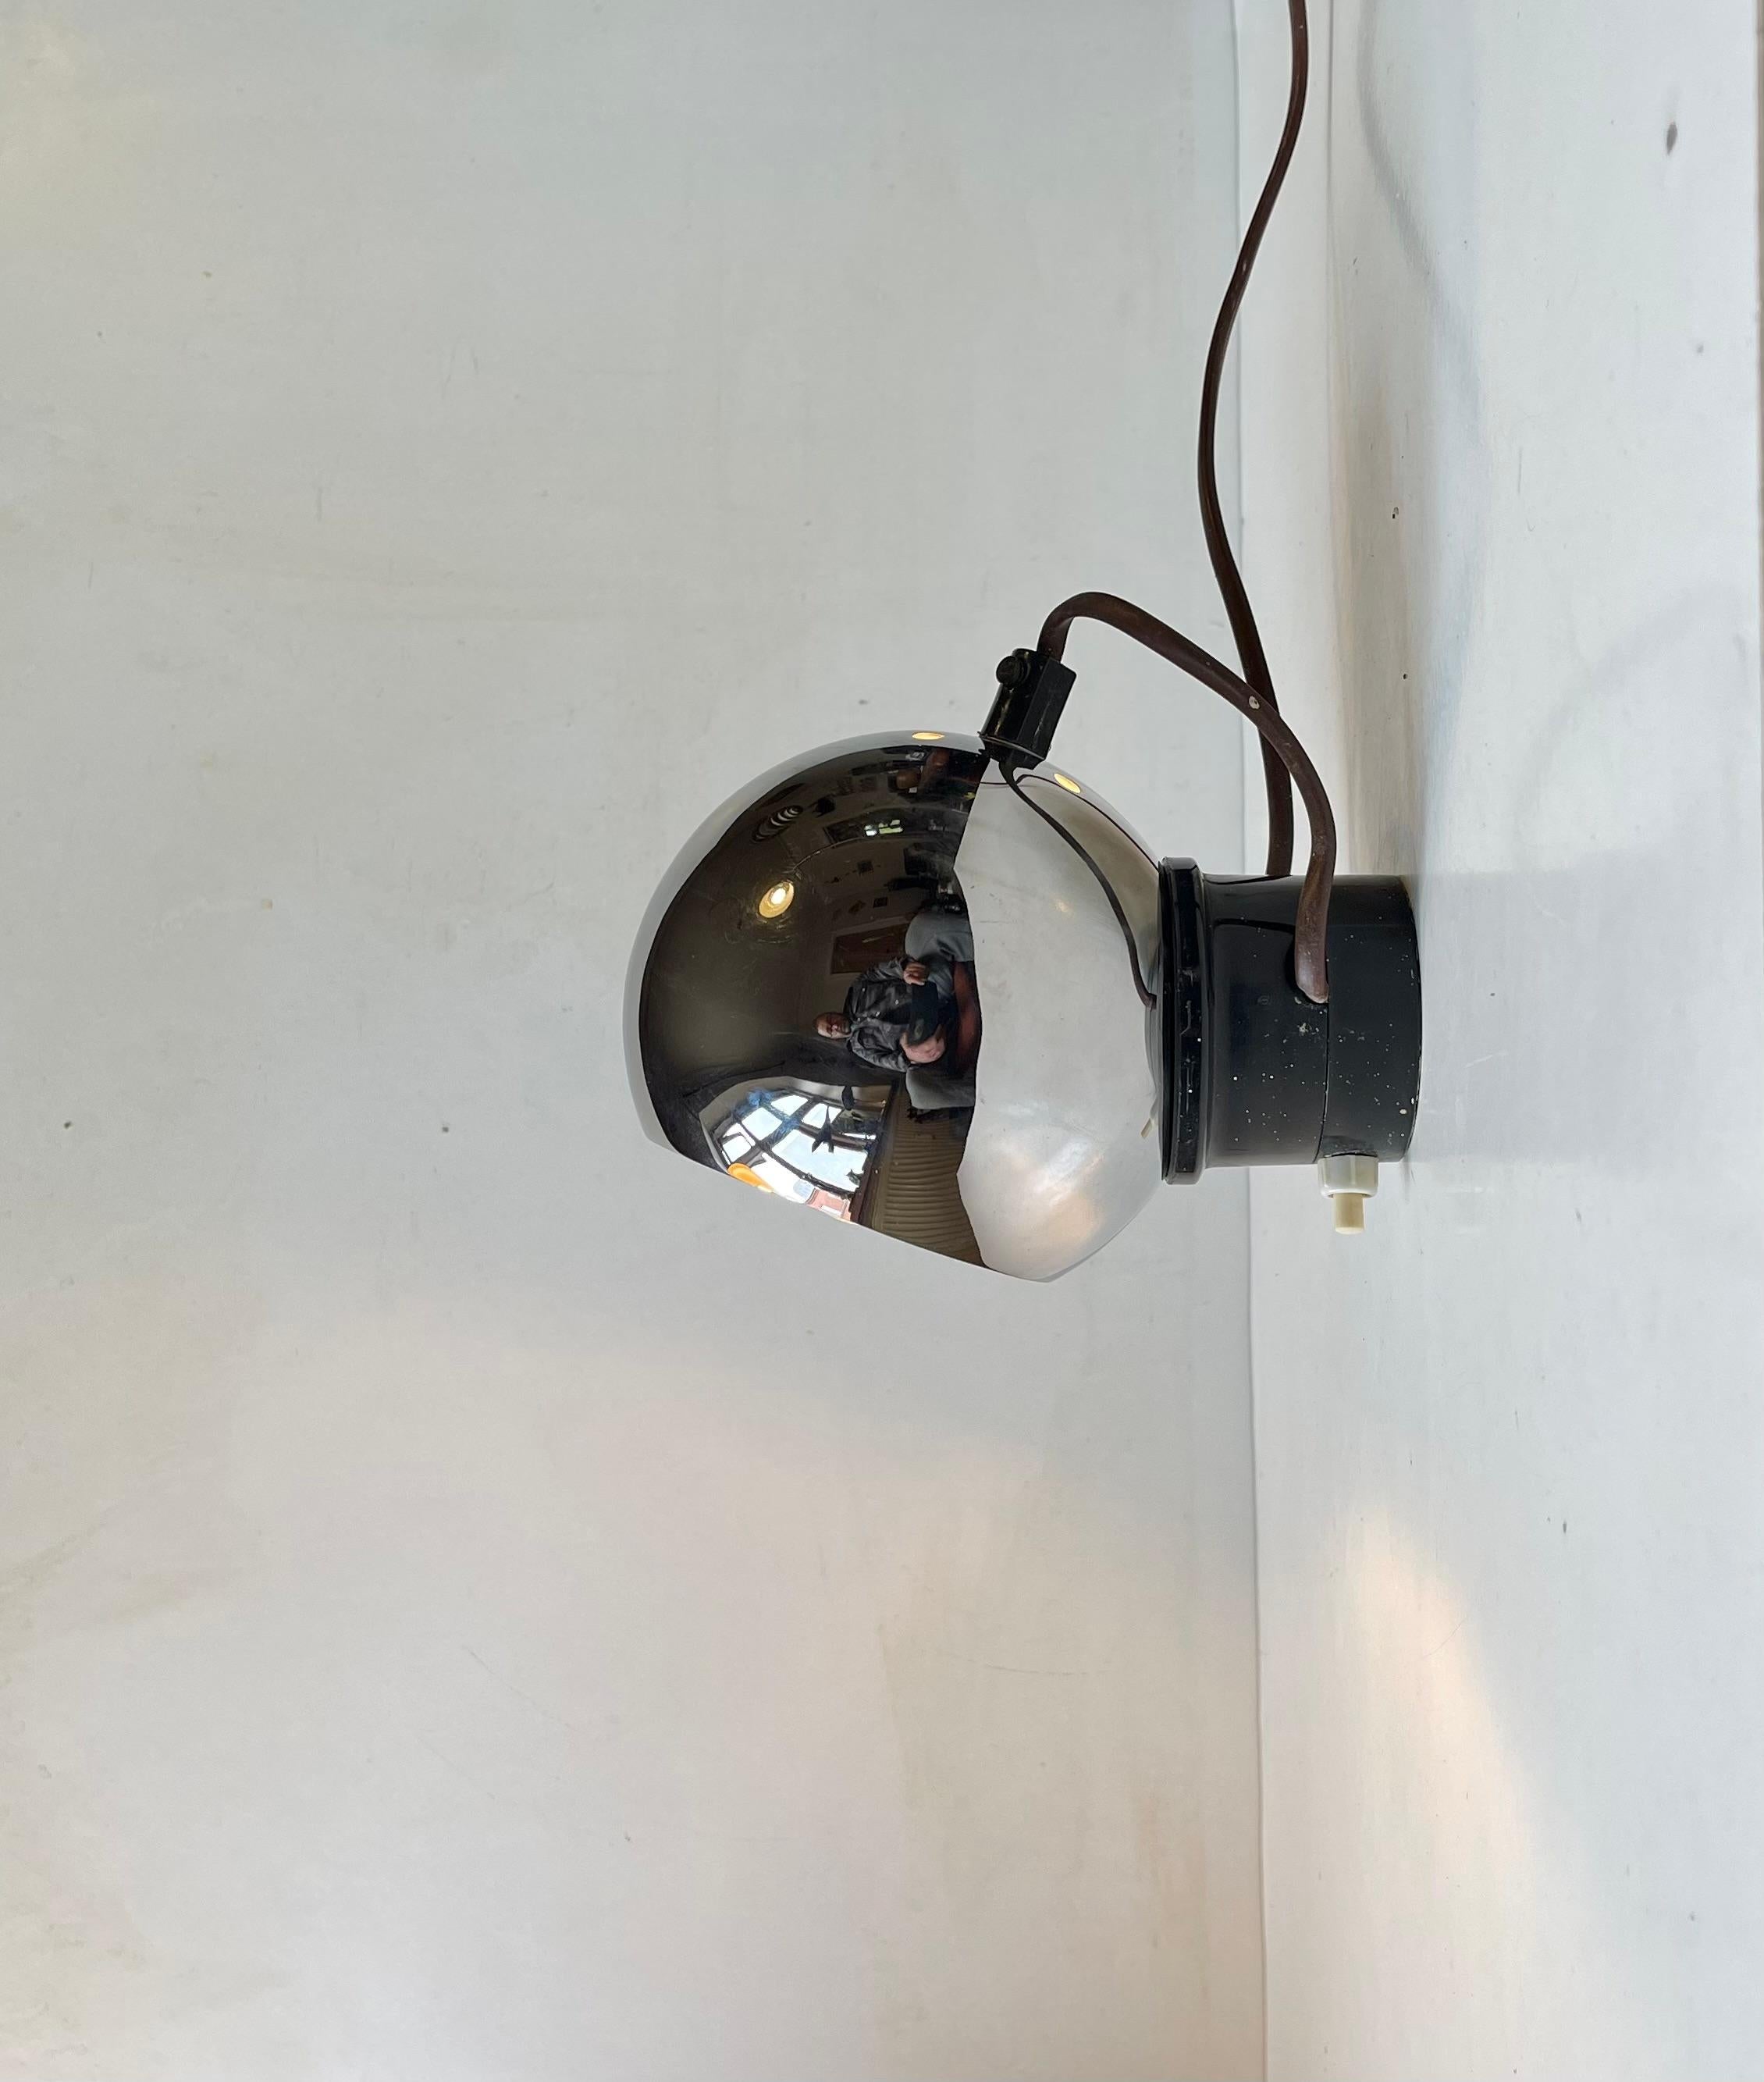 European Midcentury Magnetic Mirror Chrome Eye-Ball Wall Sconce, 1970s For Sale